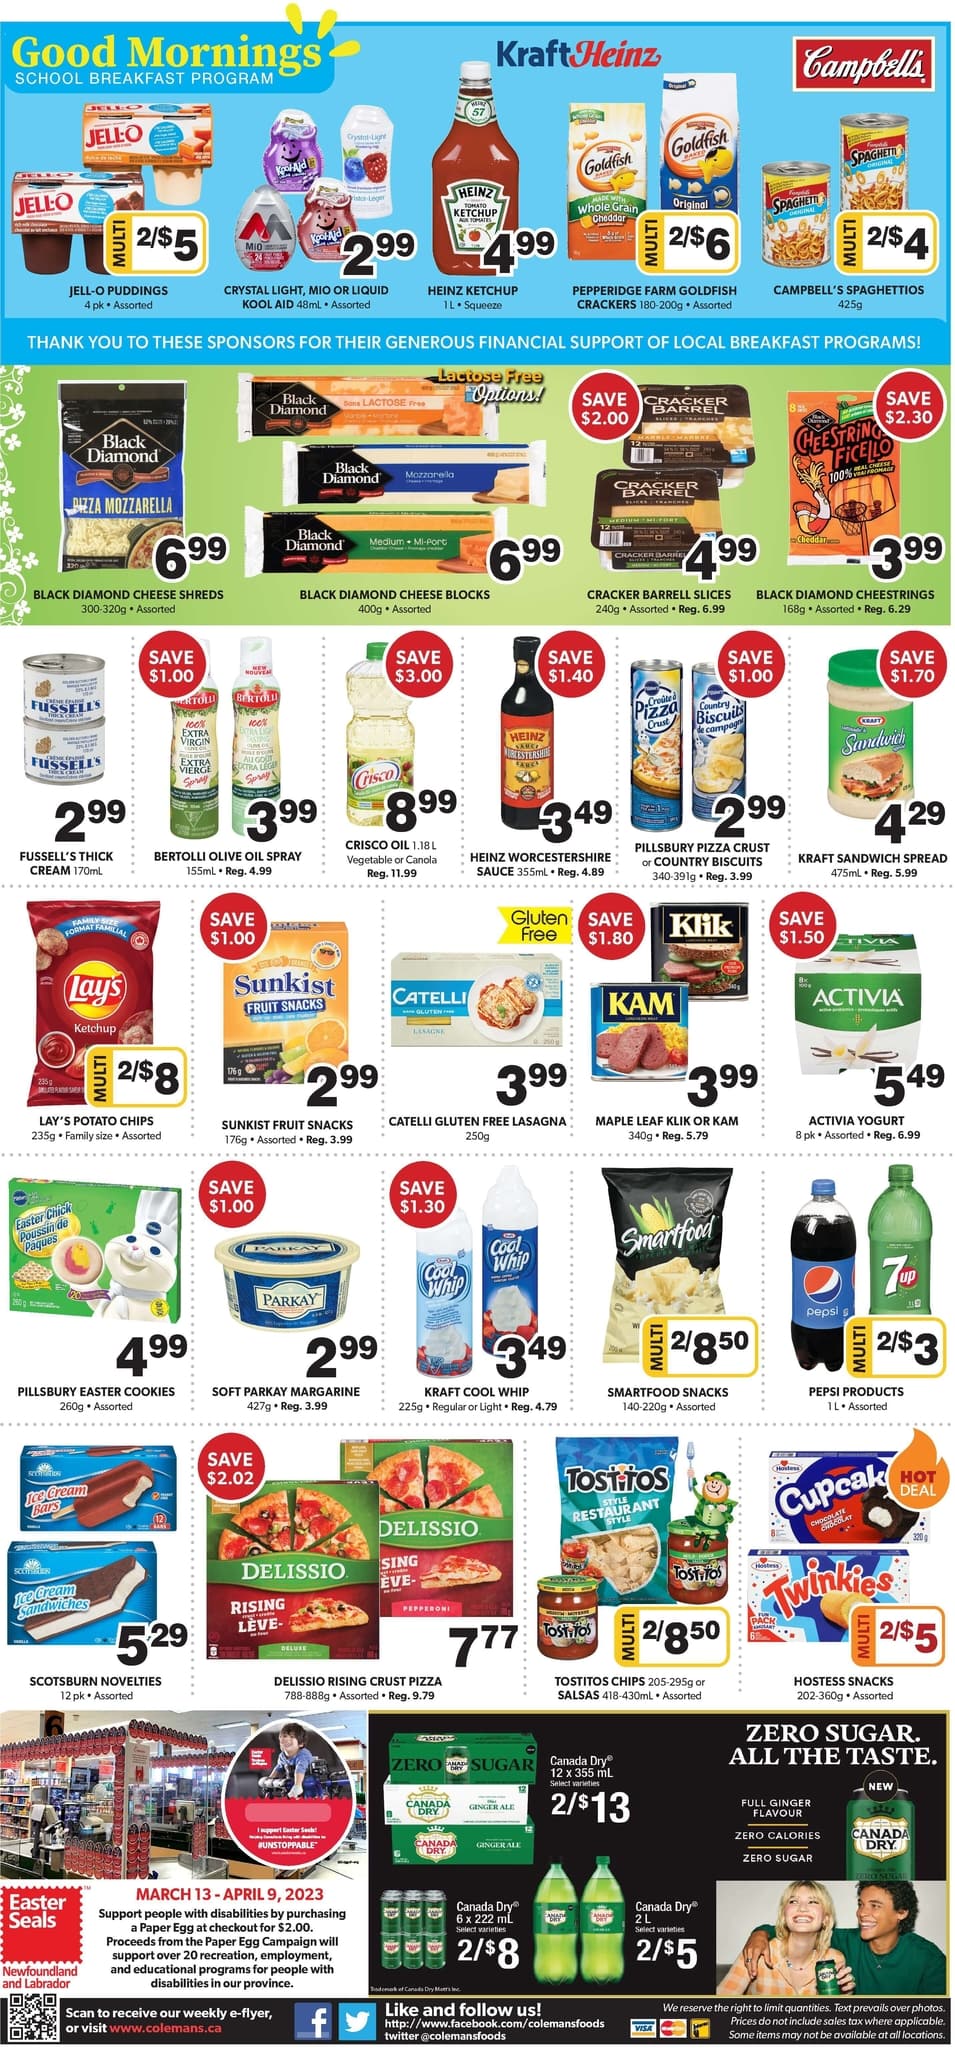 Colemans - Weekly Flyer Specials - Page 6